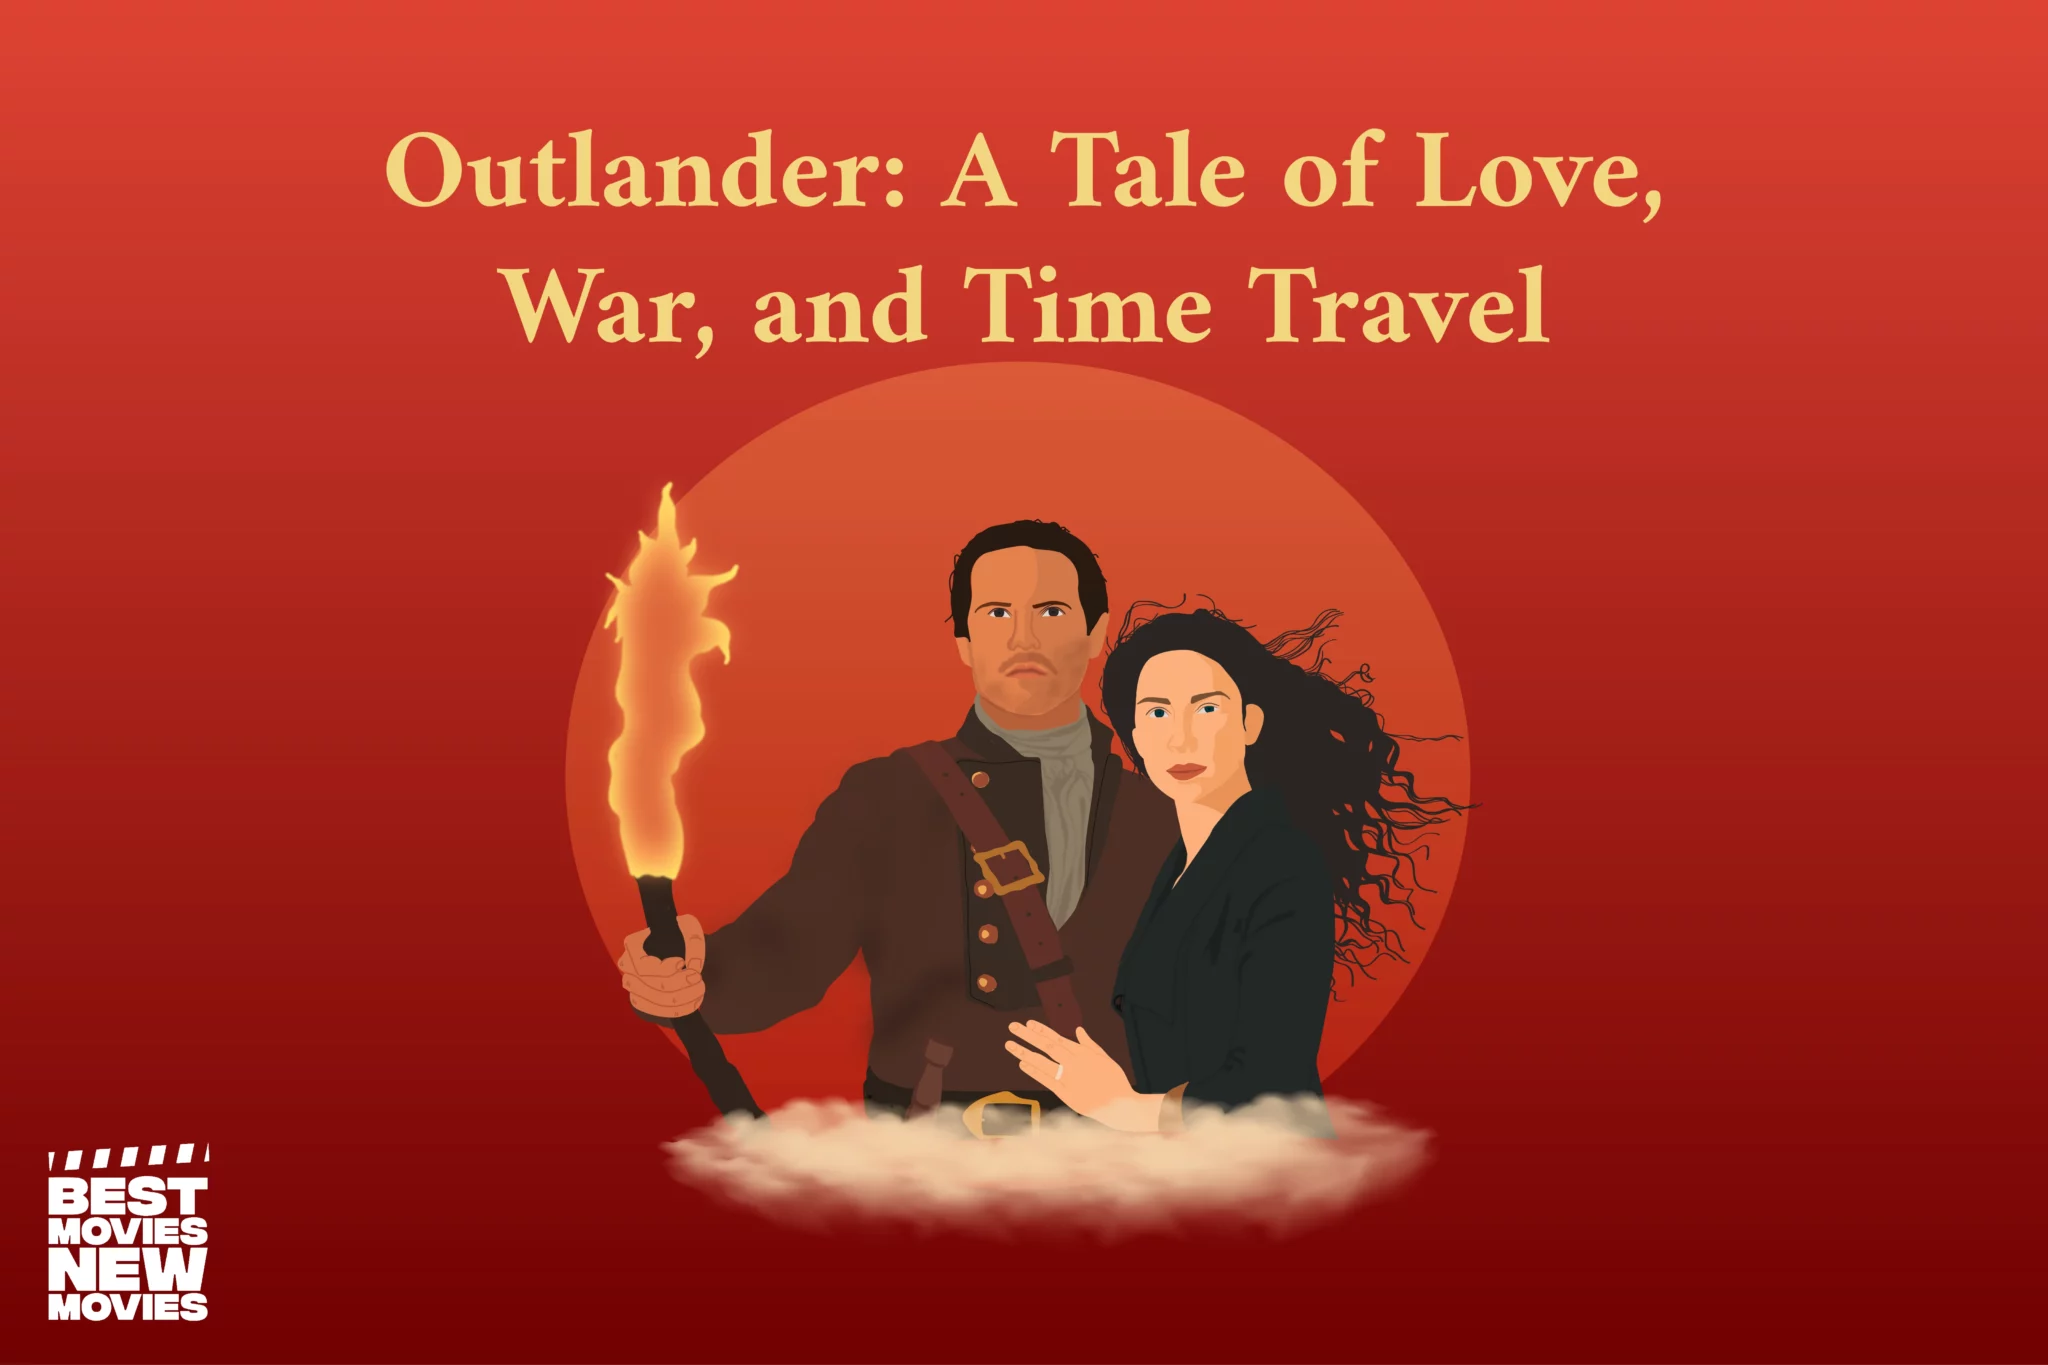 Outlander A Tale of Love, War, and Time Travel